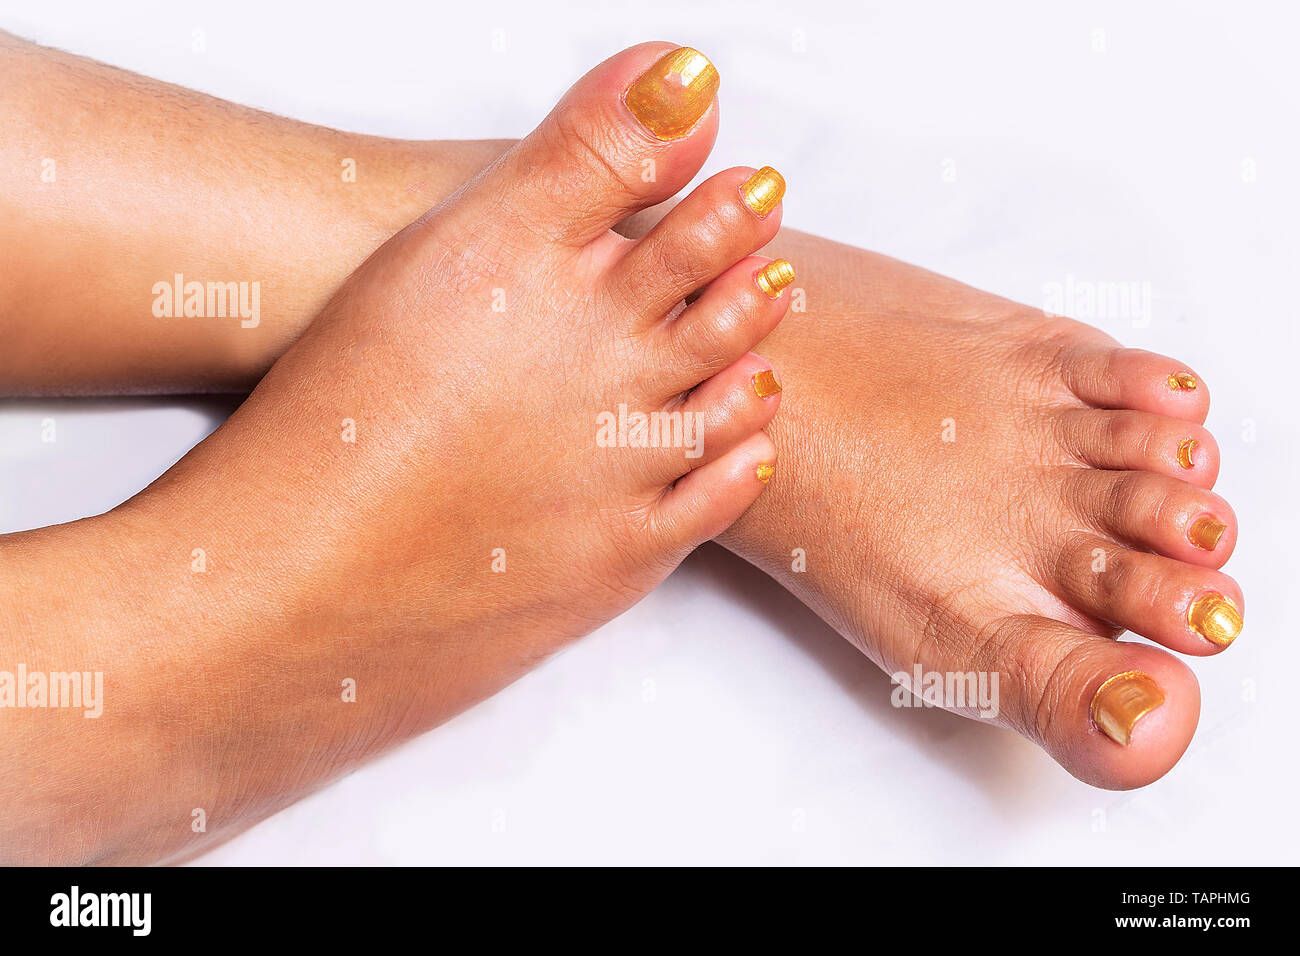 Female feet with carefully pedicured fashionable golden nails displayed in the crossed position on Isolated white Background Natural look. Stock Photo